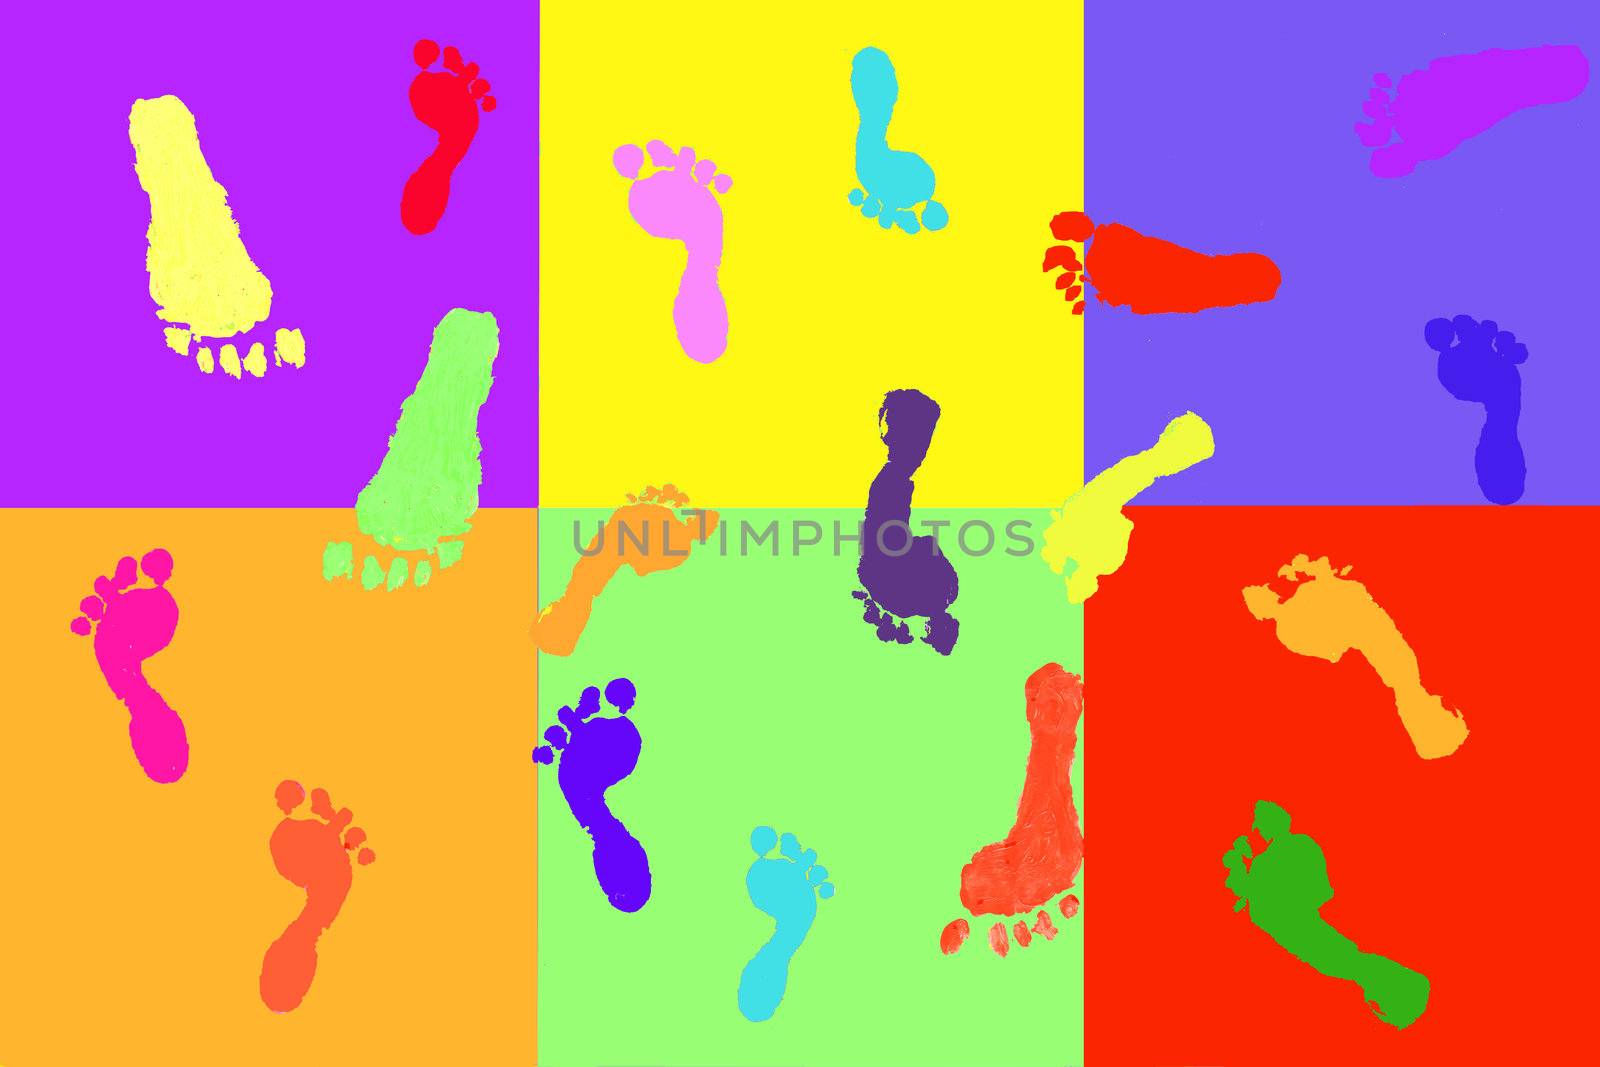 Actual footprints made by children on colorful blocks pattern; by jarenwicklund